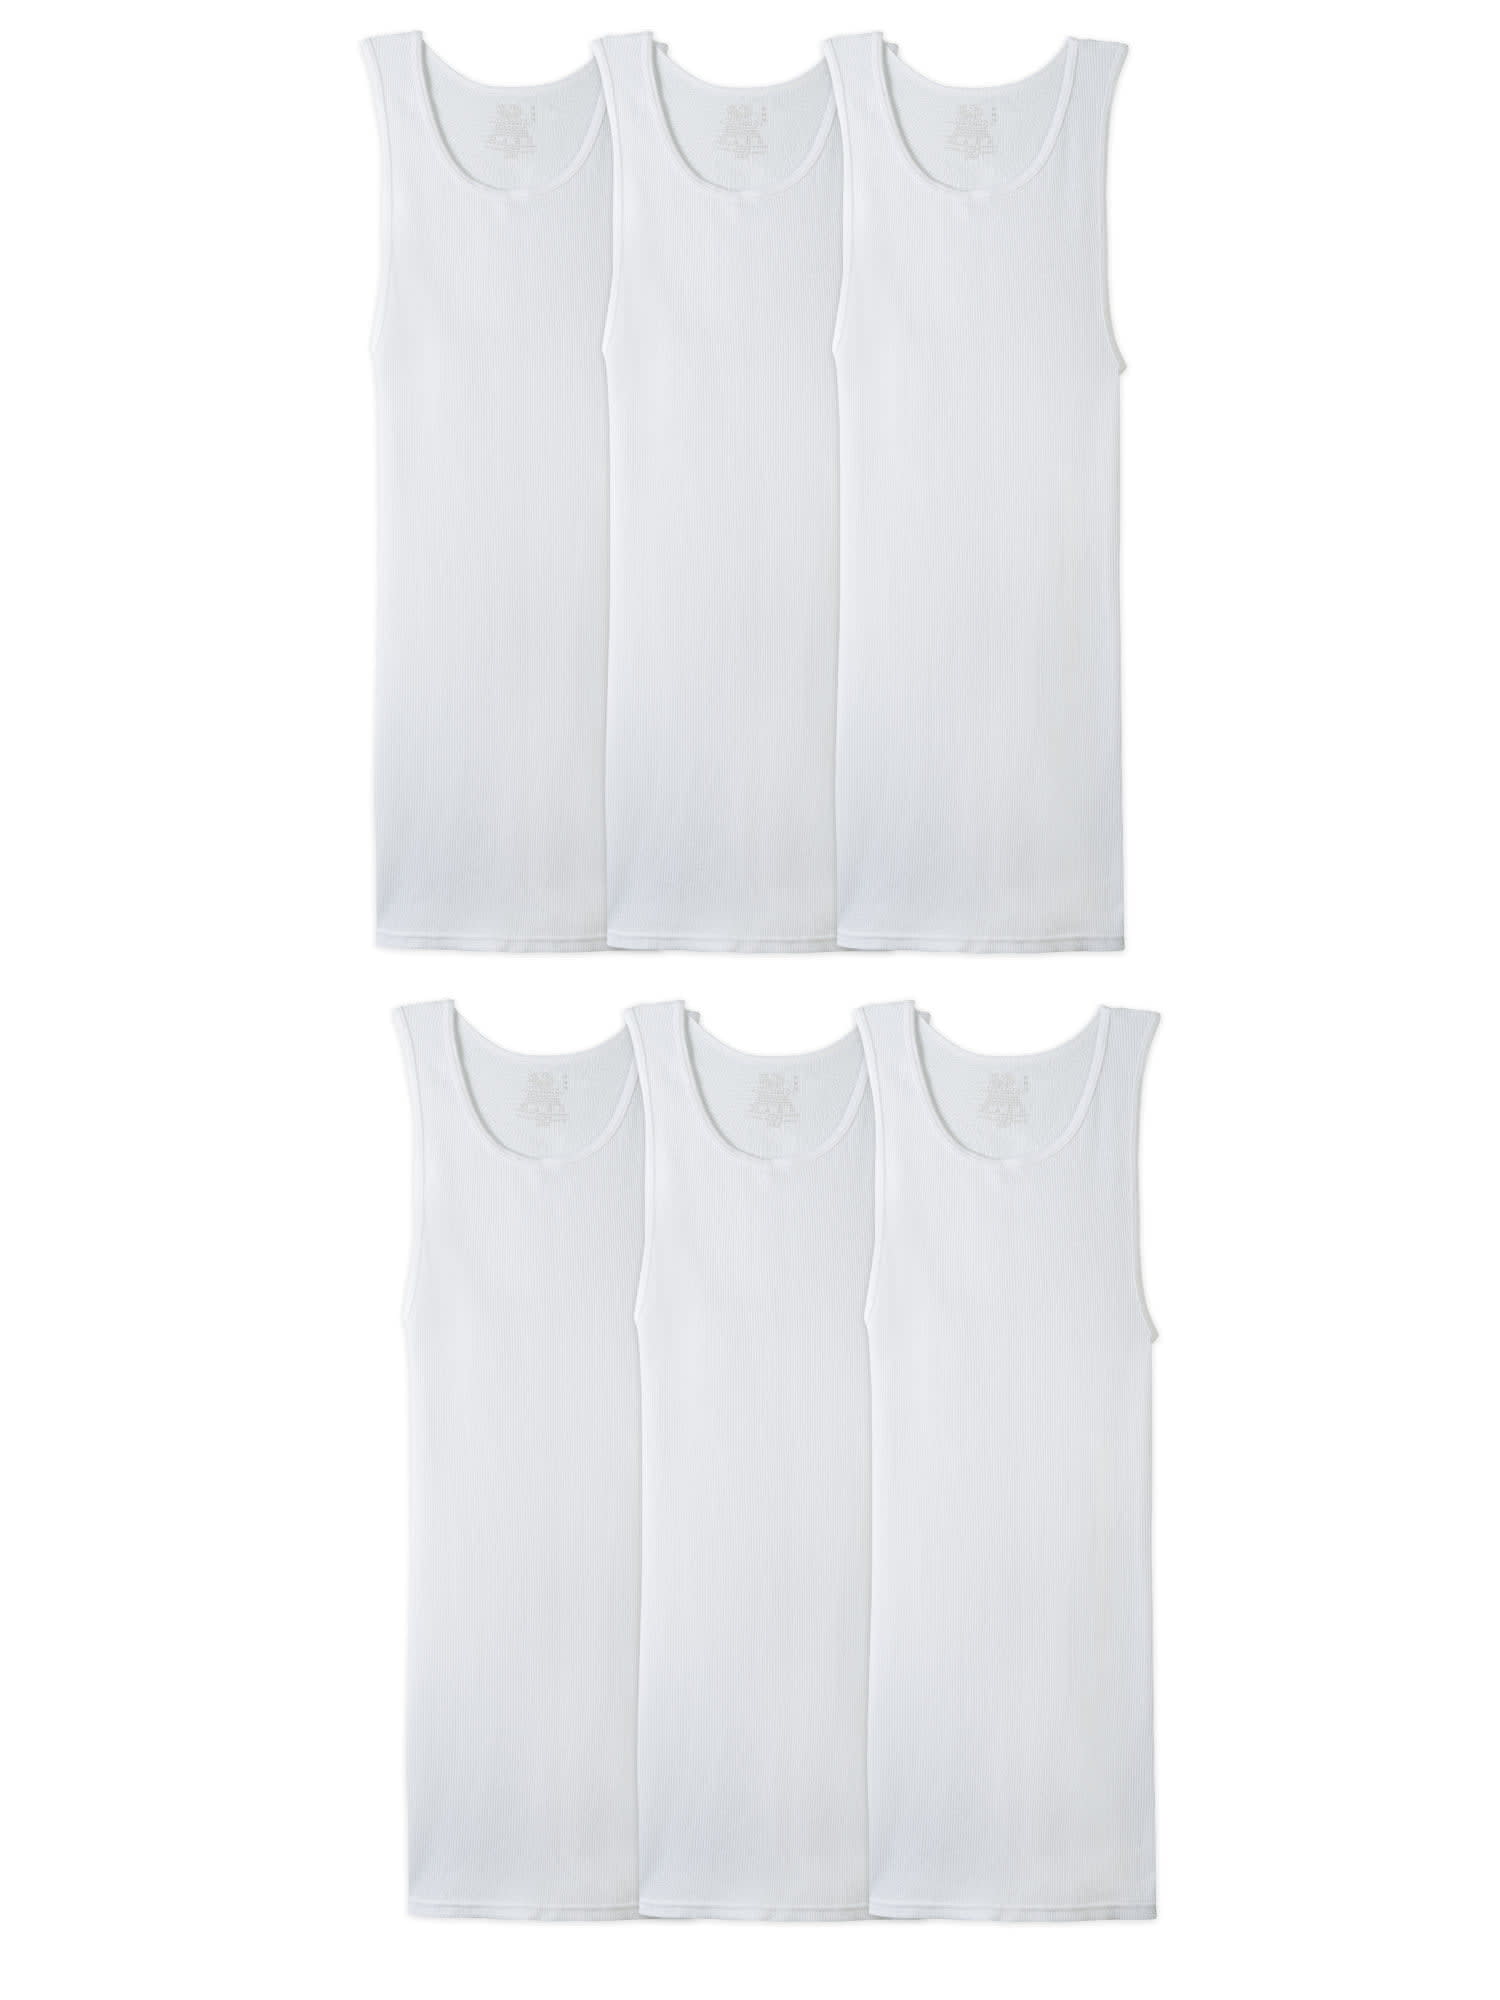 Fruit of the Loom Men's White Tank A-Shirts, 6 Pack, Sizes S-3XL - DroneUp  Delivery